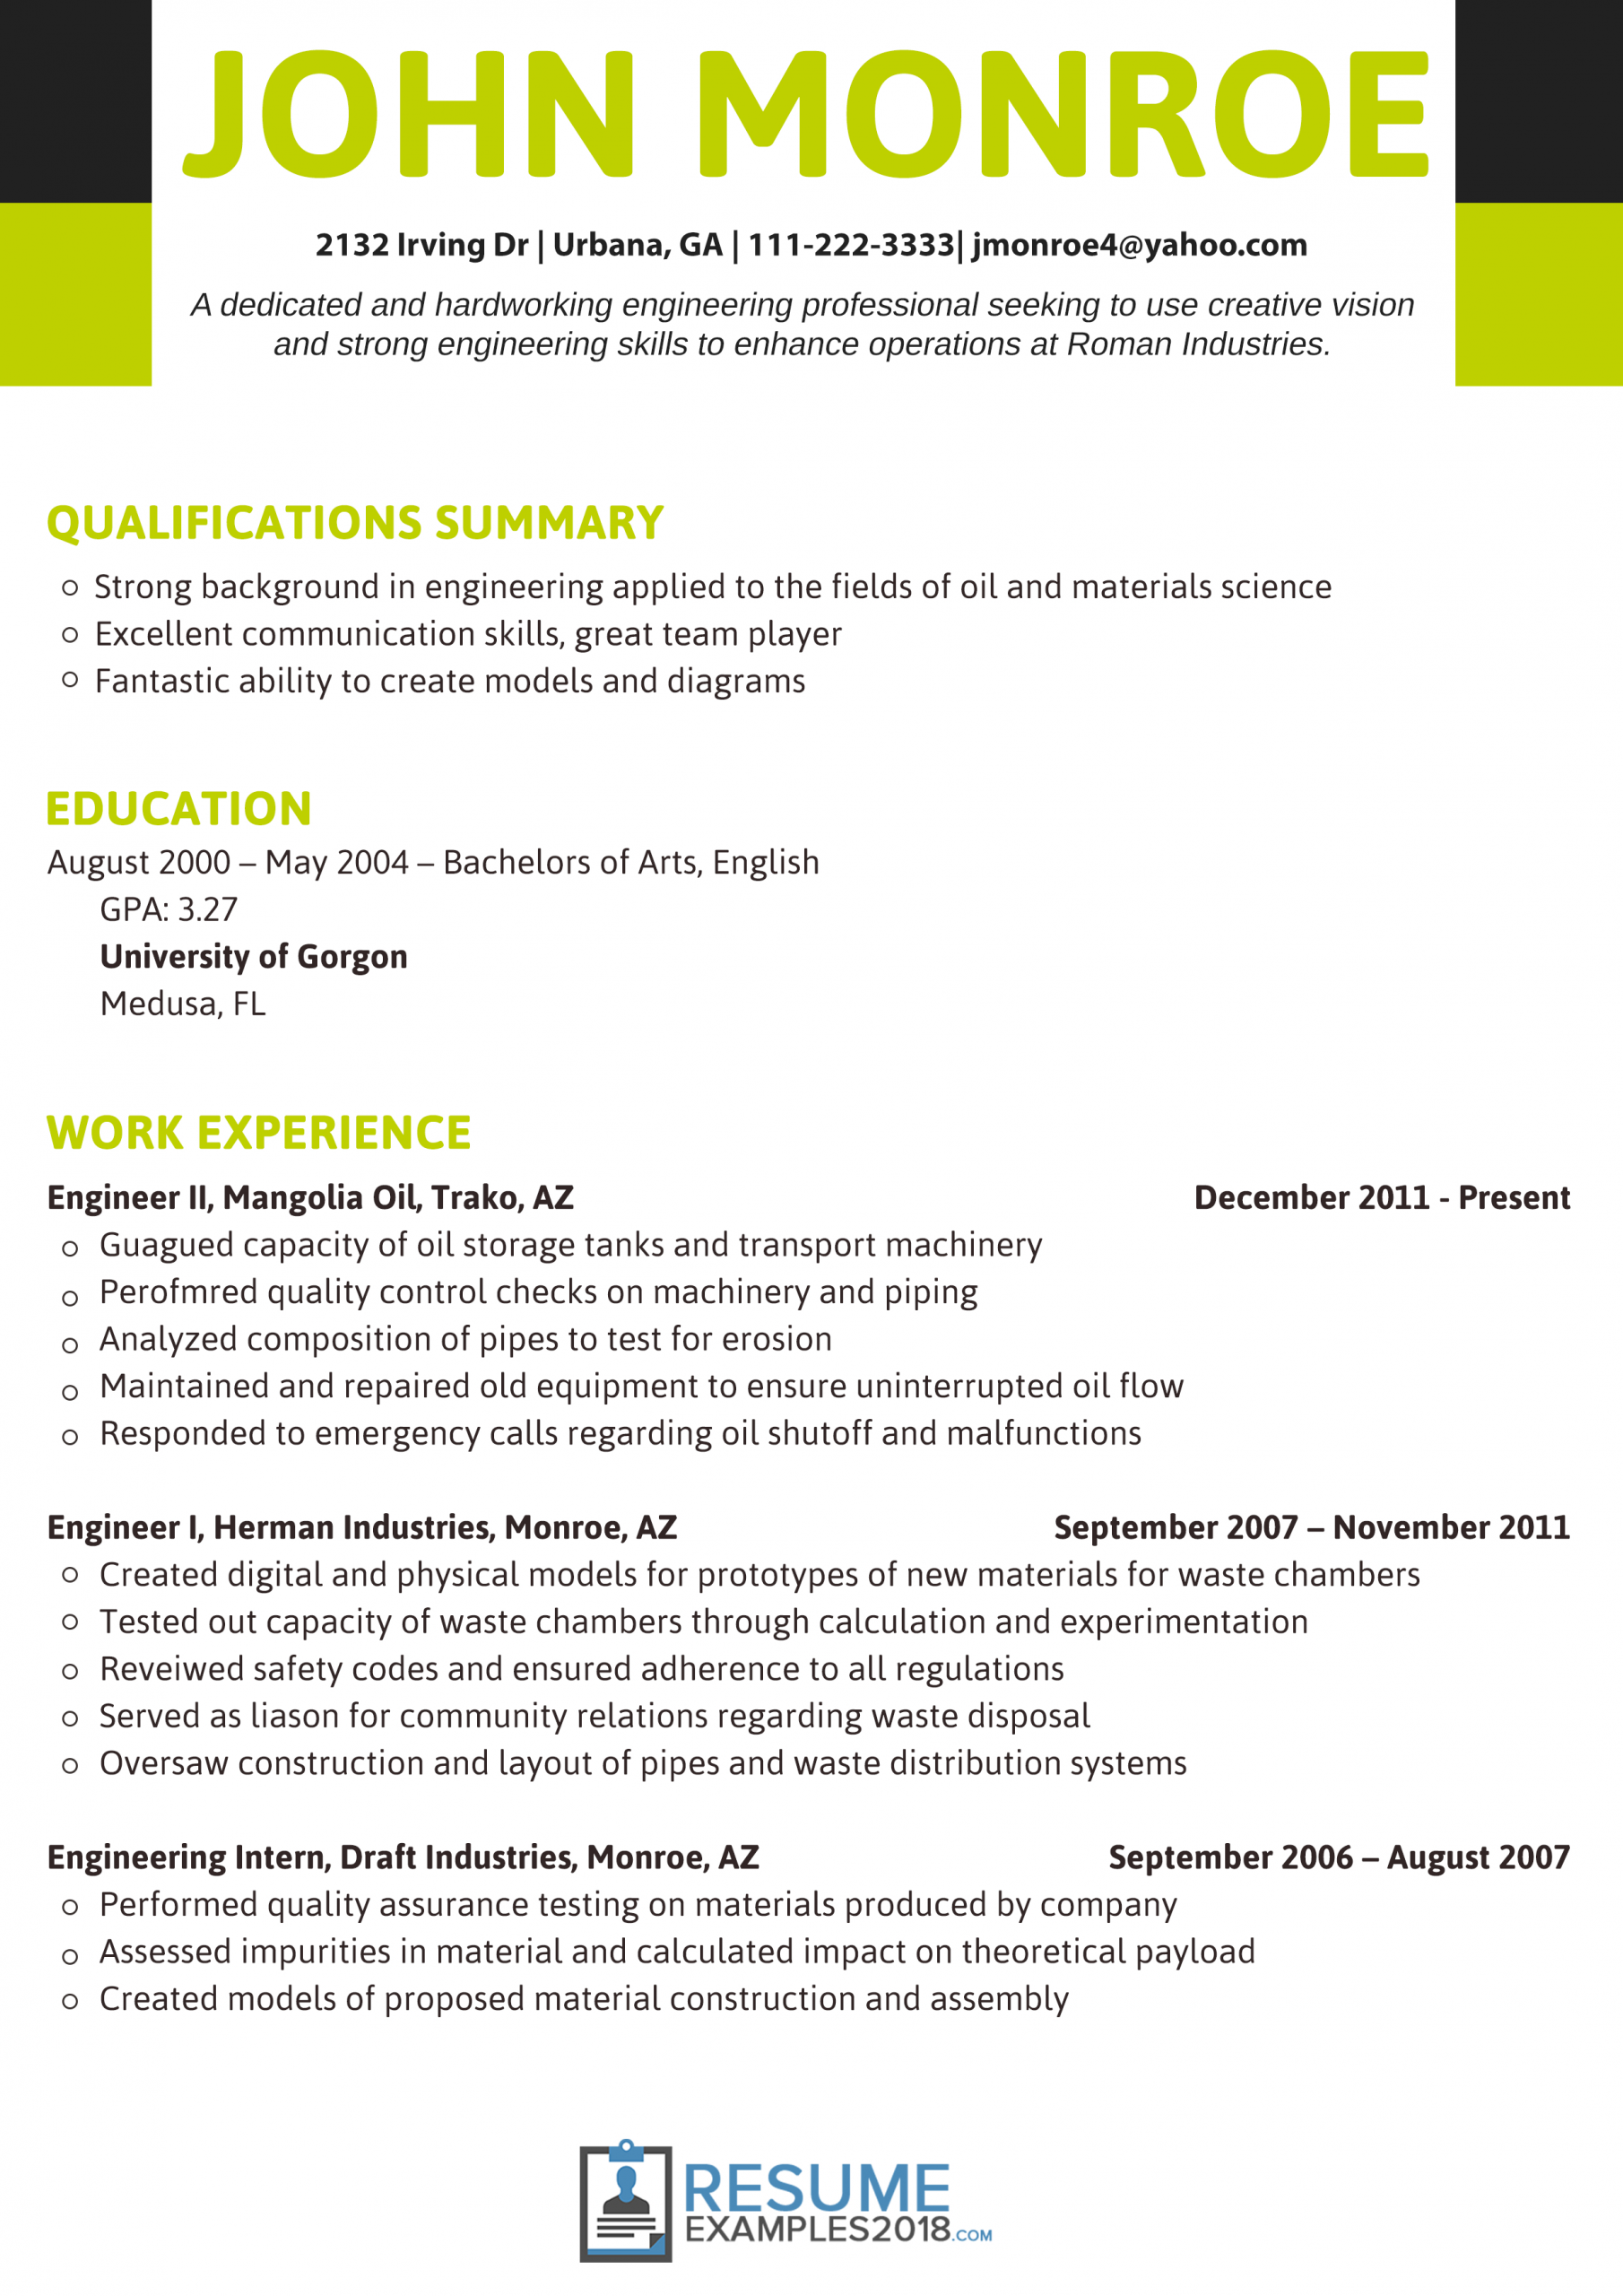 Resume Format Tips 2018 Resume Examples Professional throughout dimensions 2480 X 3508